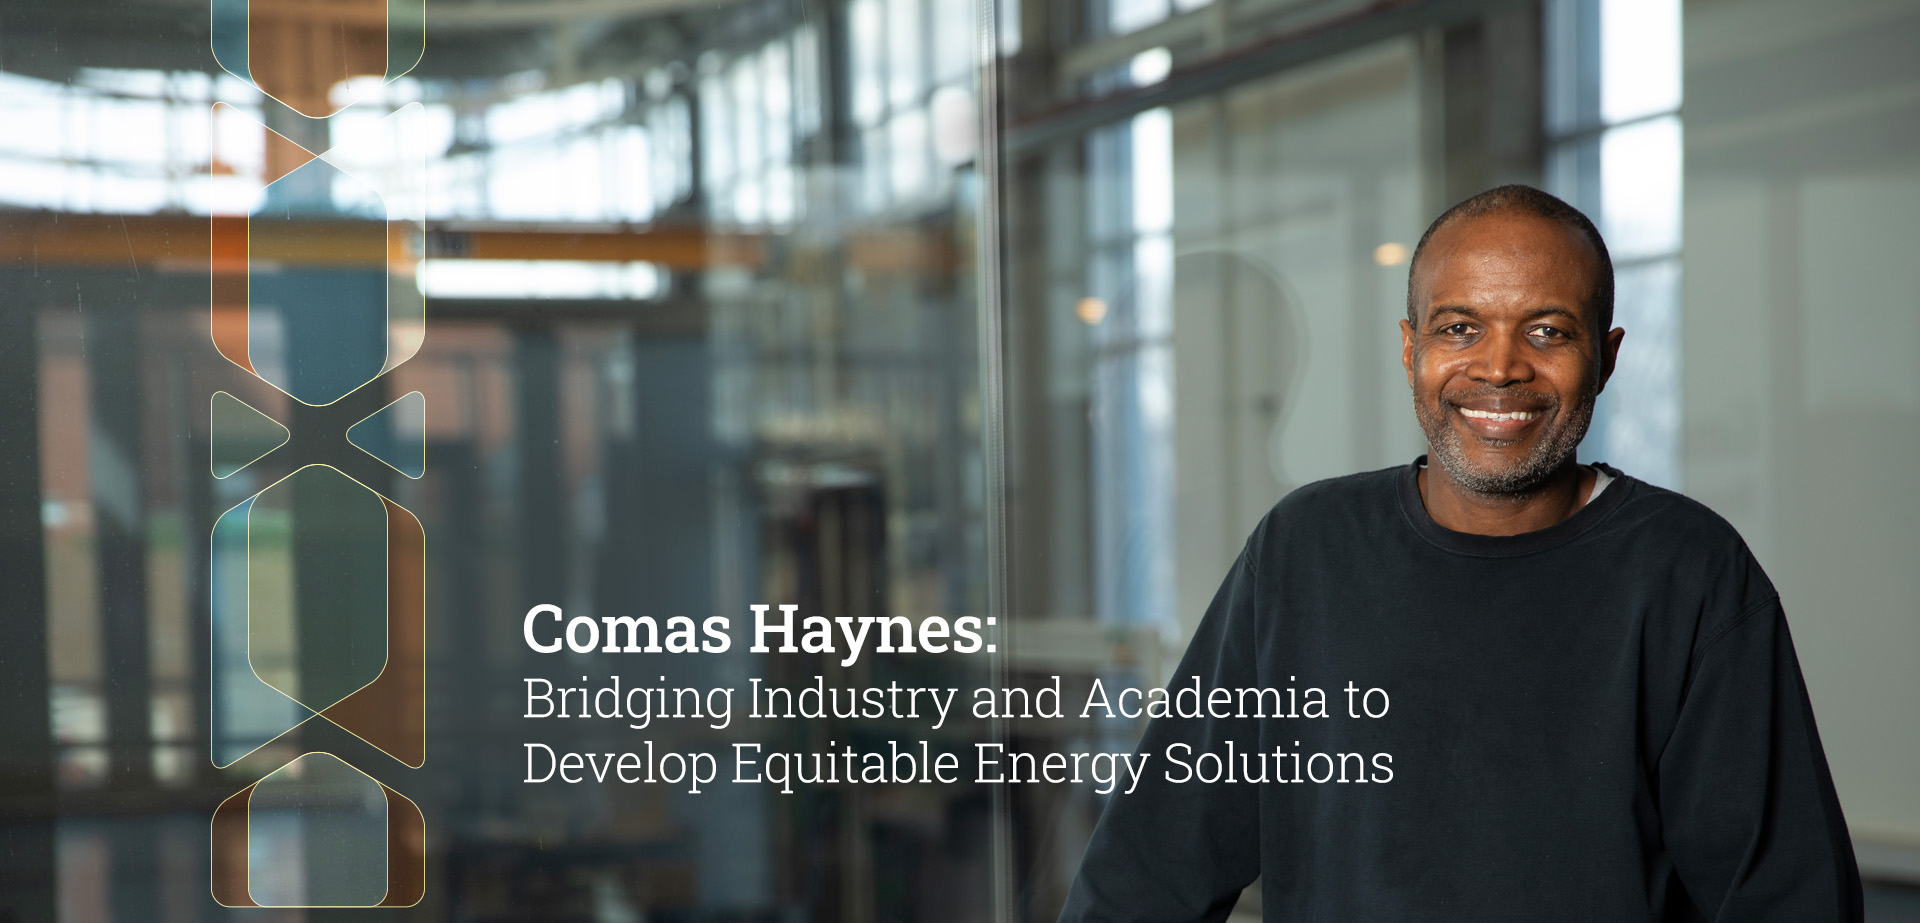 Comas Haynes seated within a glass office that overlooks a manufacturing facility